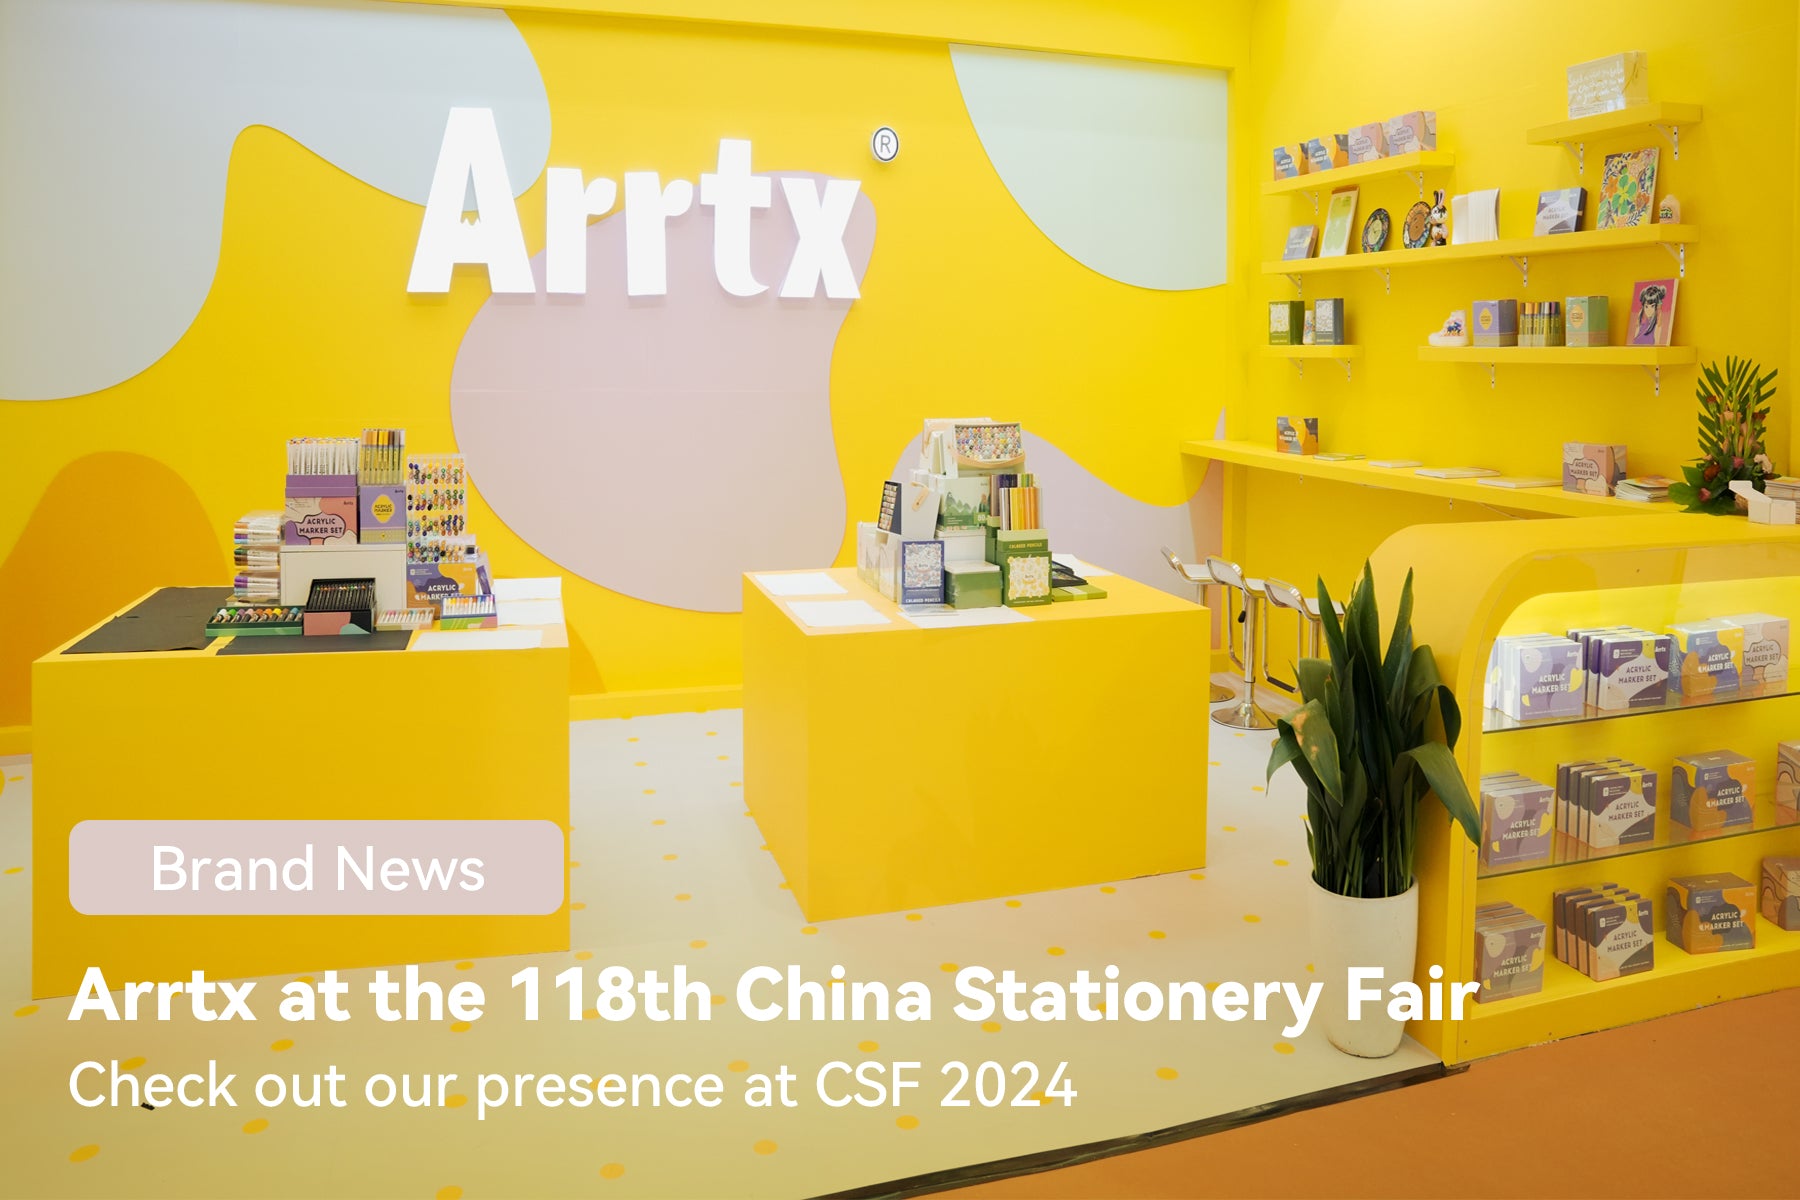 Discovery: Arrtx at the 118th China Stationery Fair